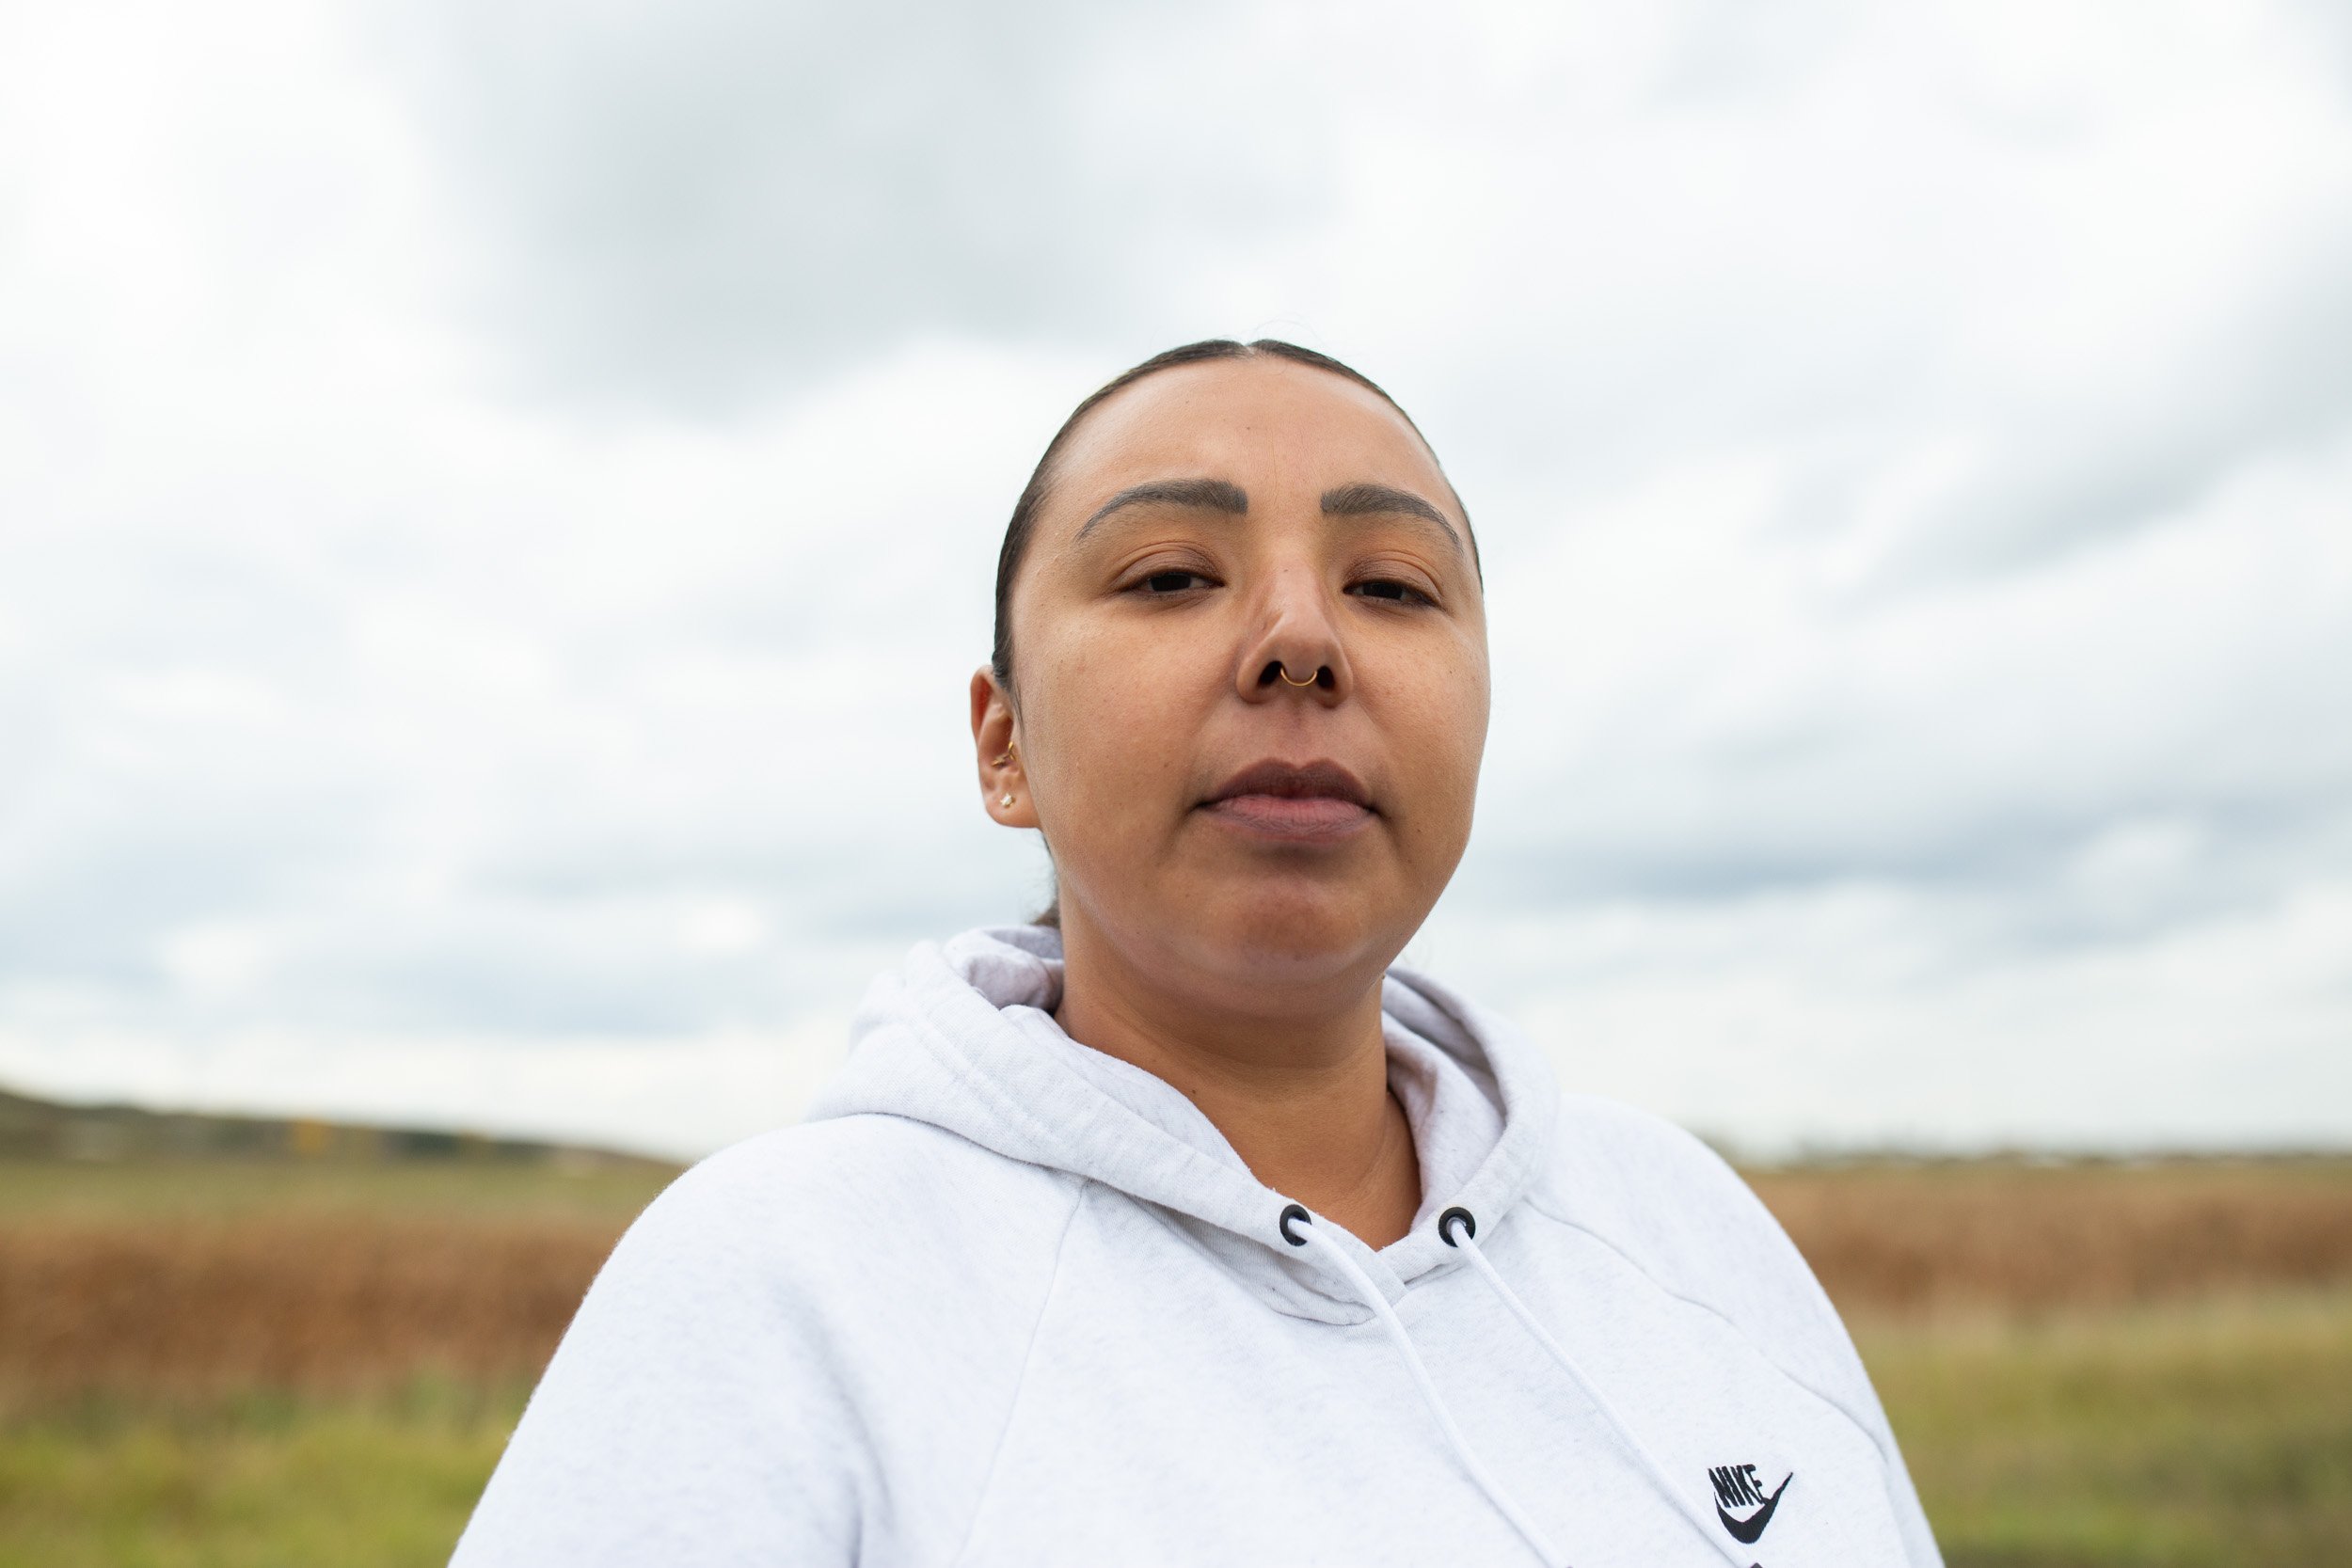  Kyra Wilson, Chief of Long Plain First Nations, visited Camp Morgan at Brady Landfill in support. Wilson has been directly affected by the murders within her own family, and is focusing her priorities on the health and wellness of their community, e